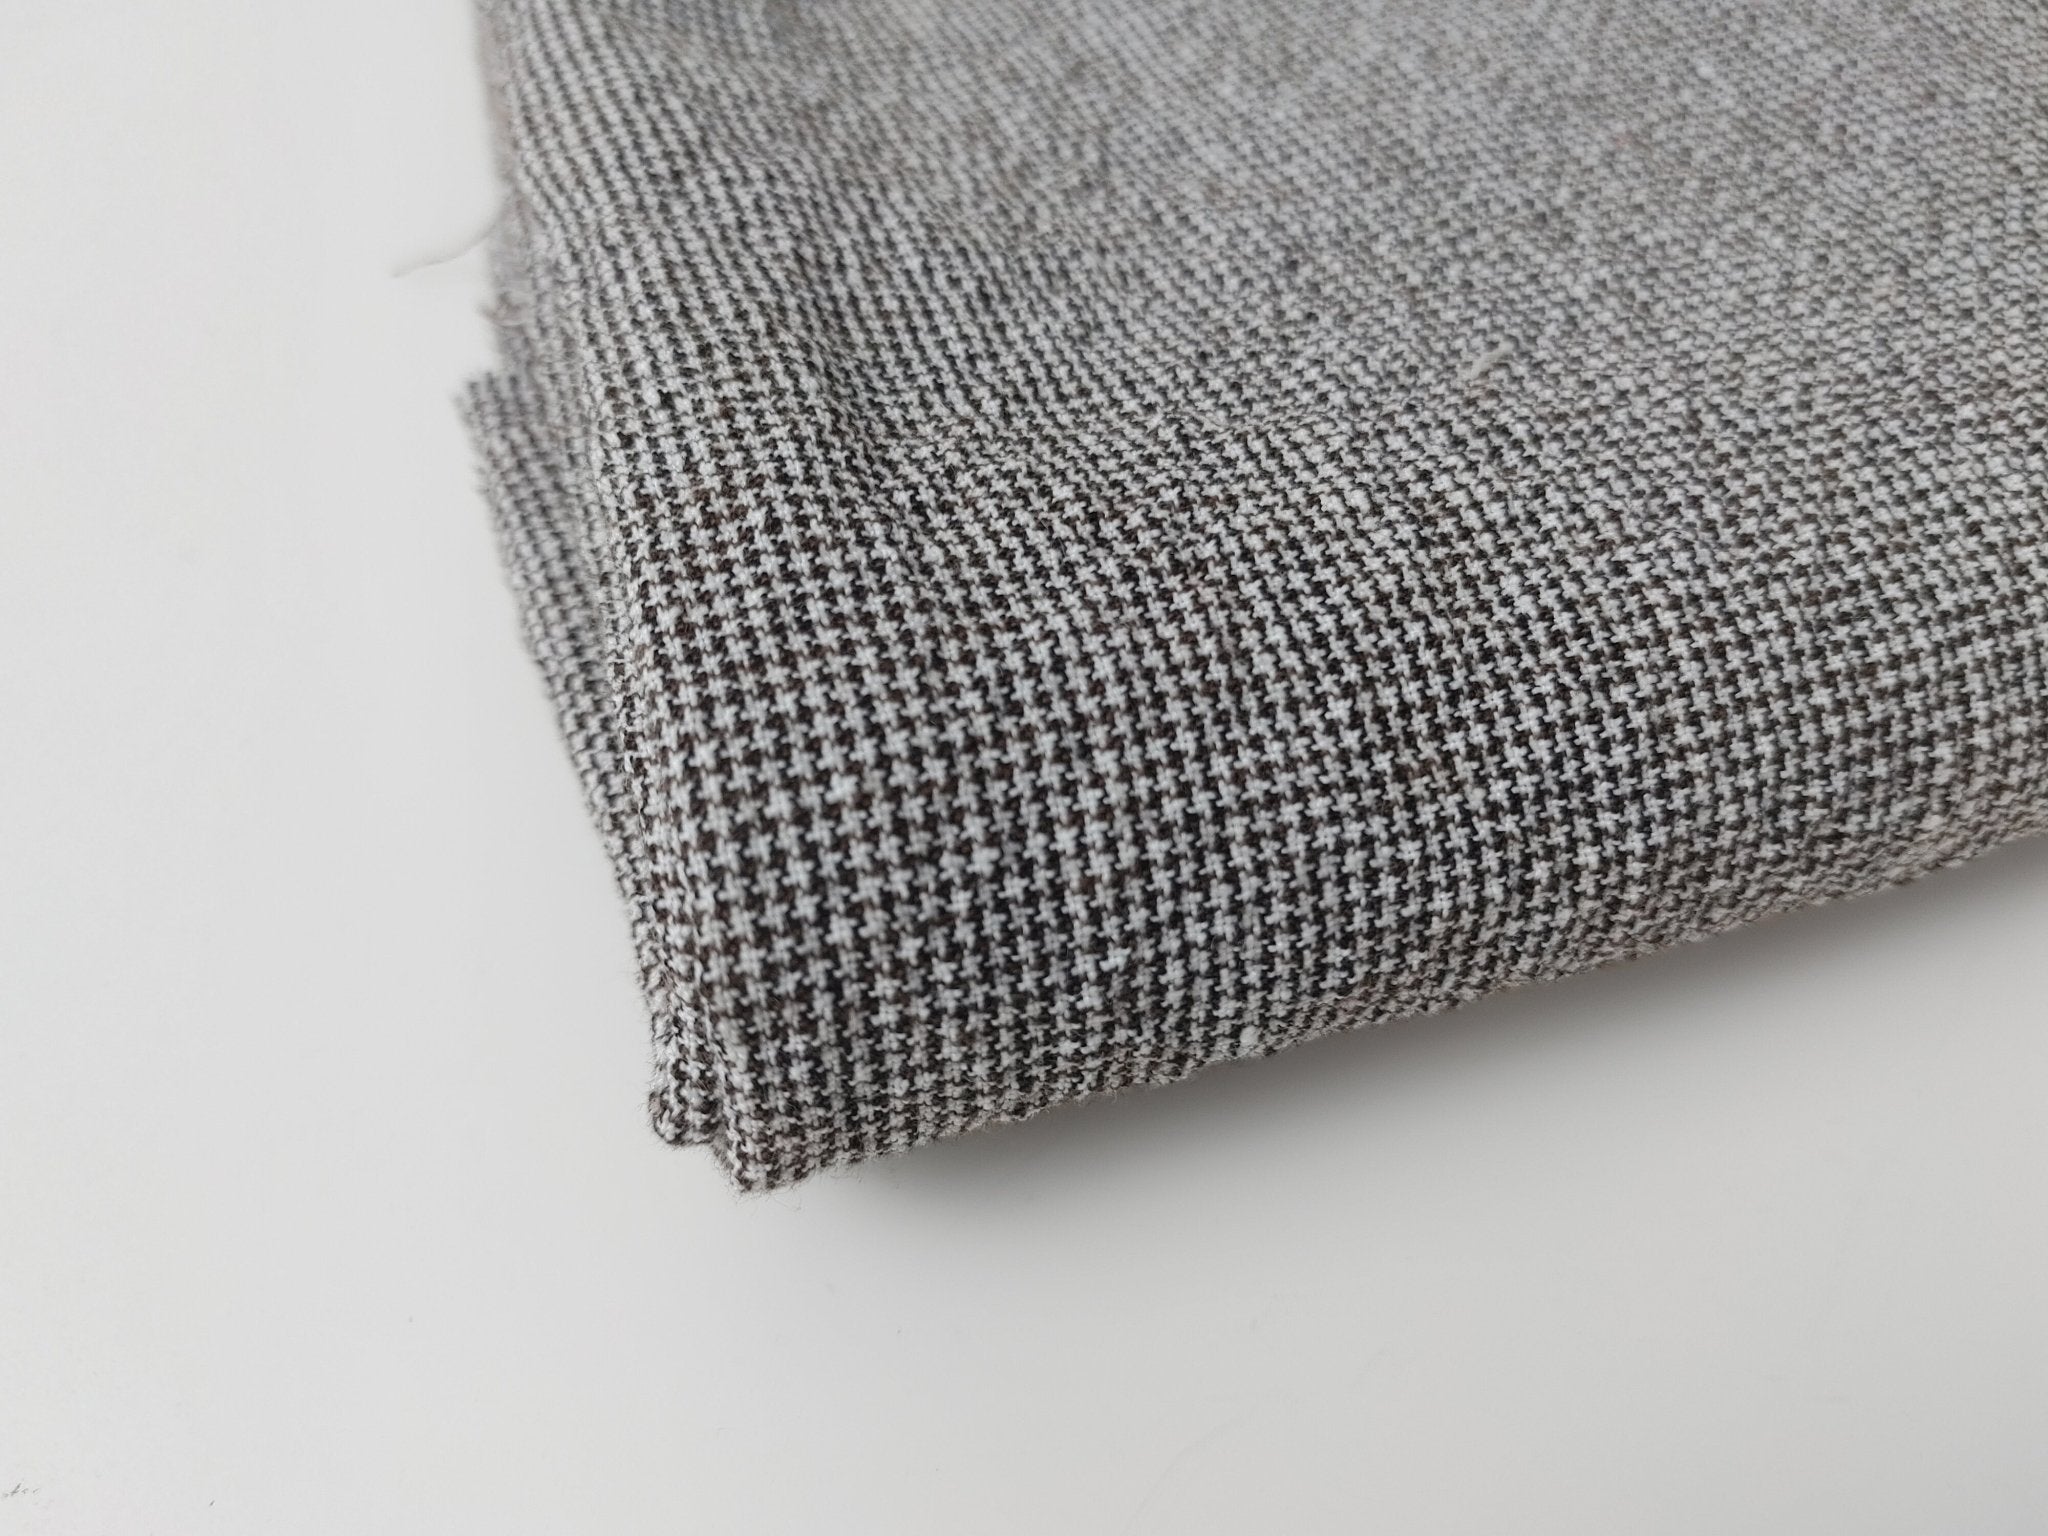 Houndstooth Starcheck 4-way Stretch Fabric with Wrinkle Effect (7731) - The Linen Lab - Brown